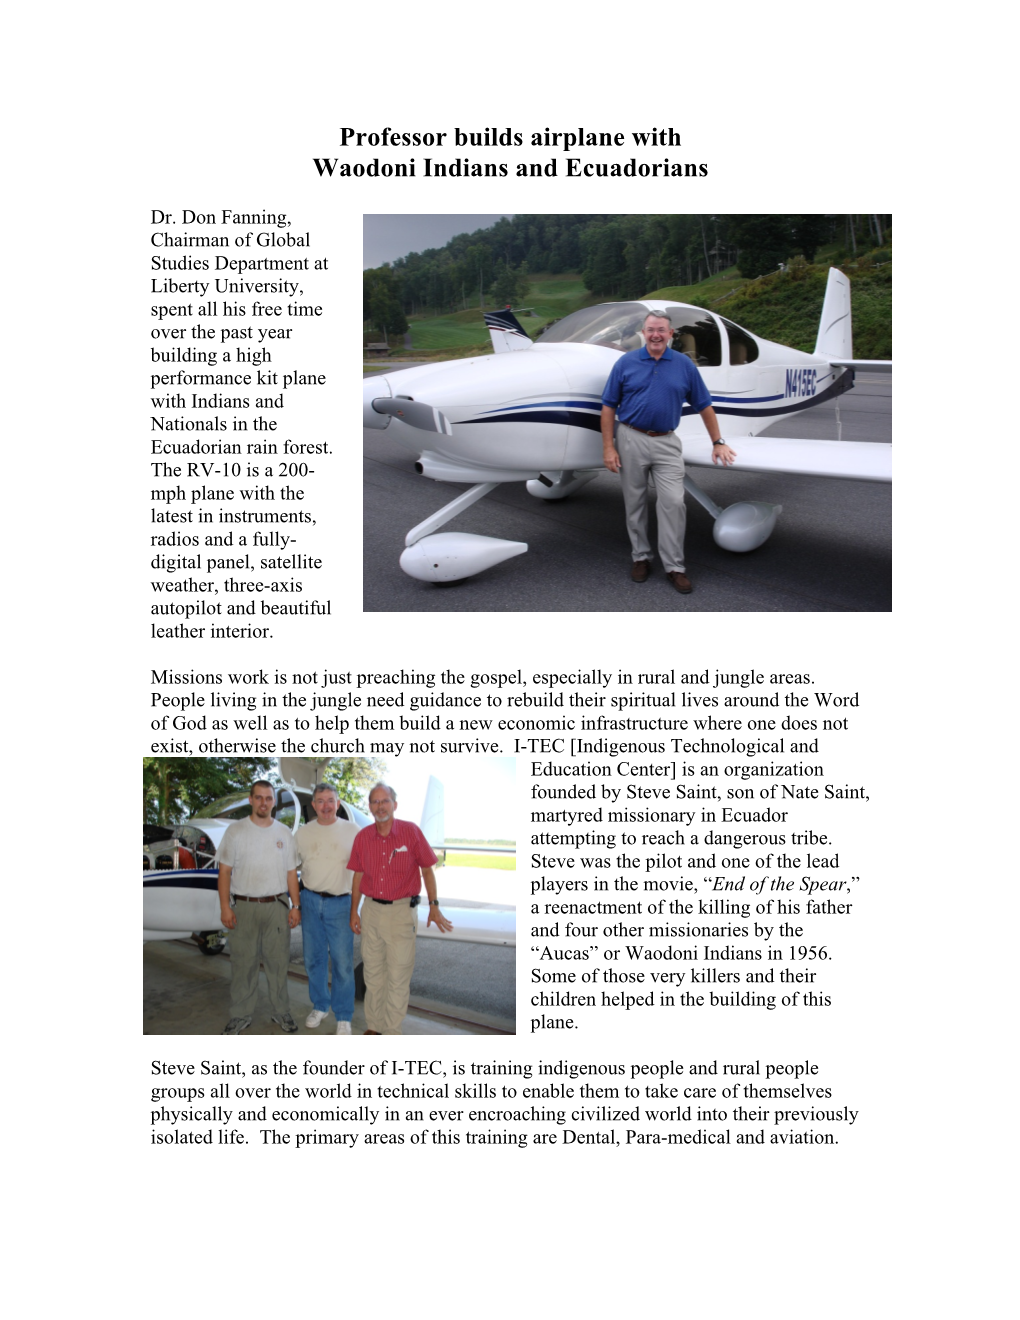 Professor Builds Airplane with Waodoni Indians and Ecuadorians